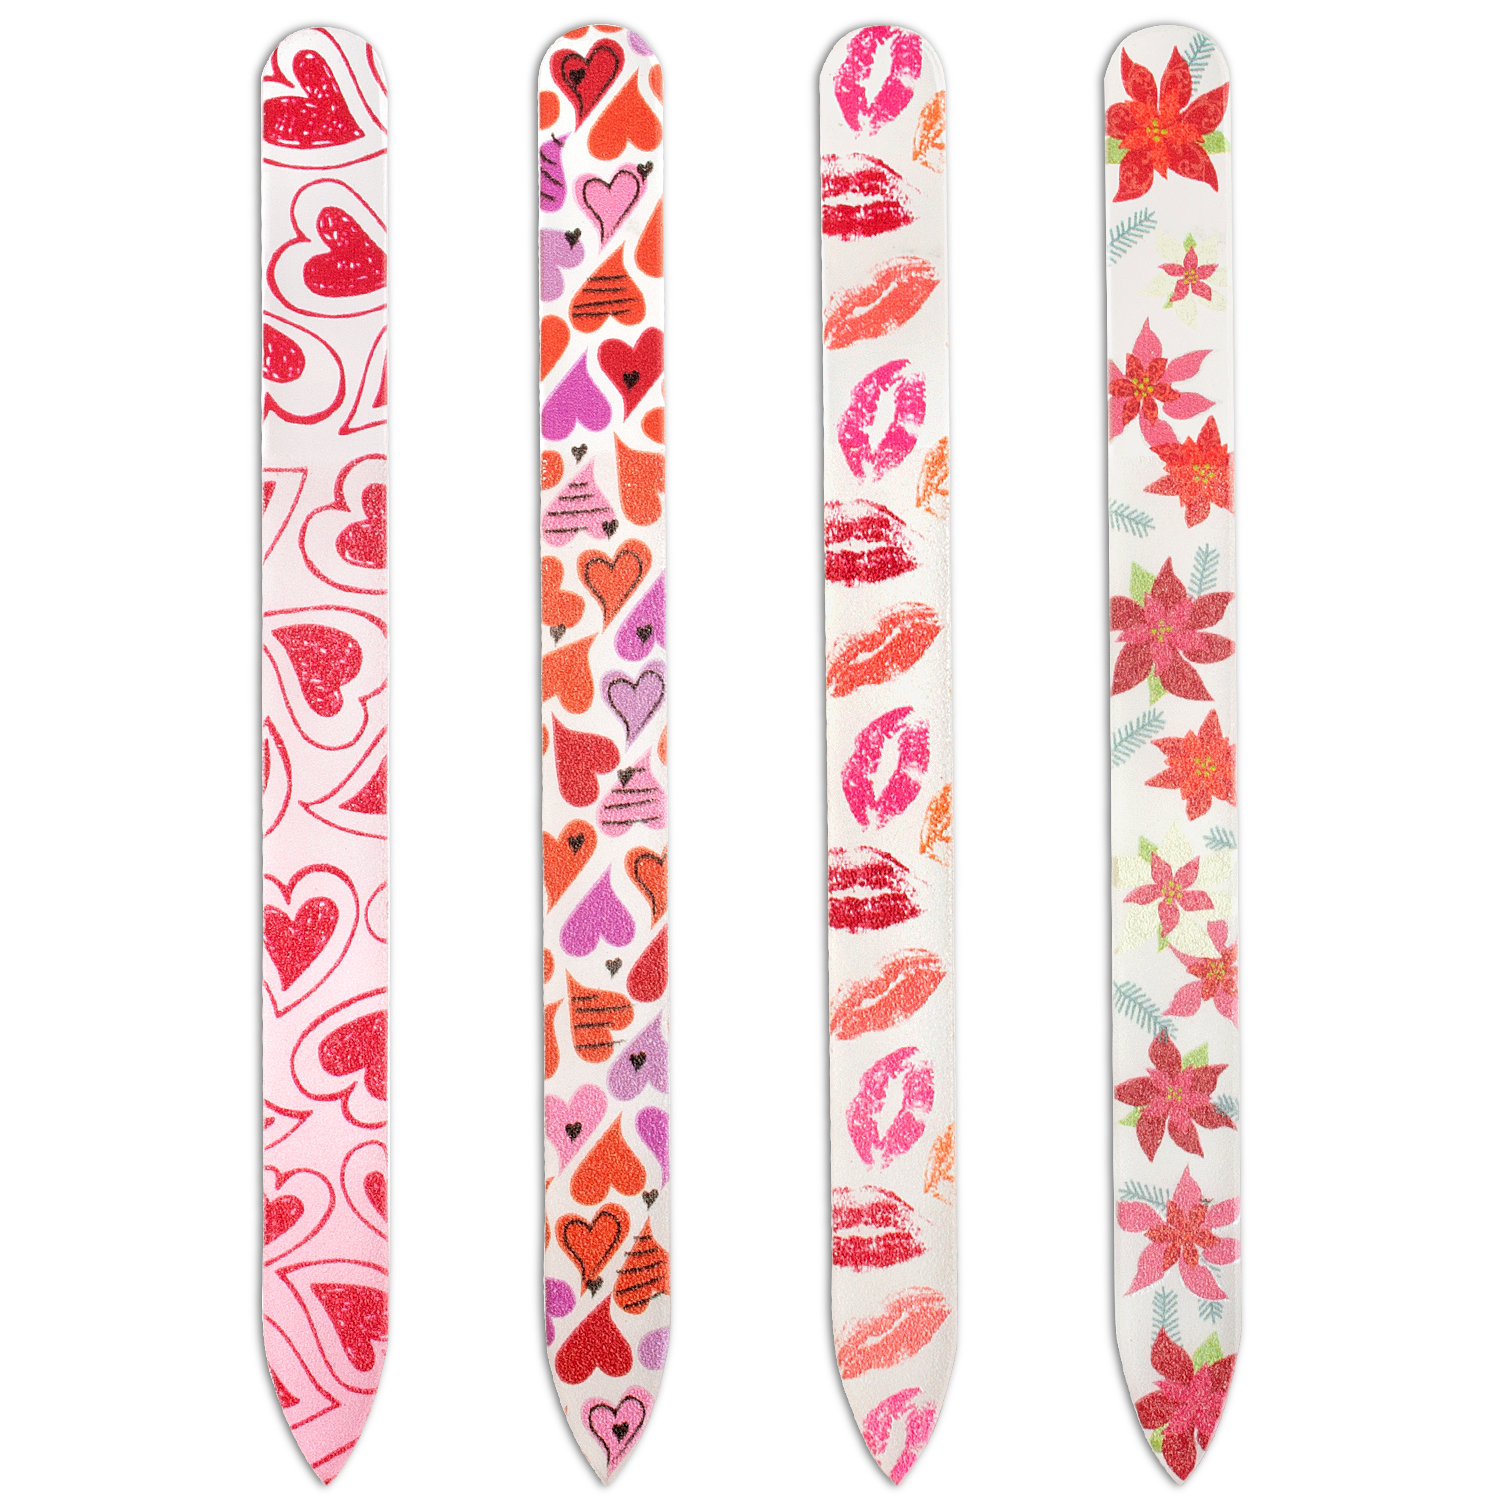 Glass Nail File With Floral Patterns